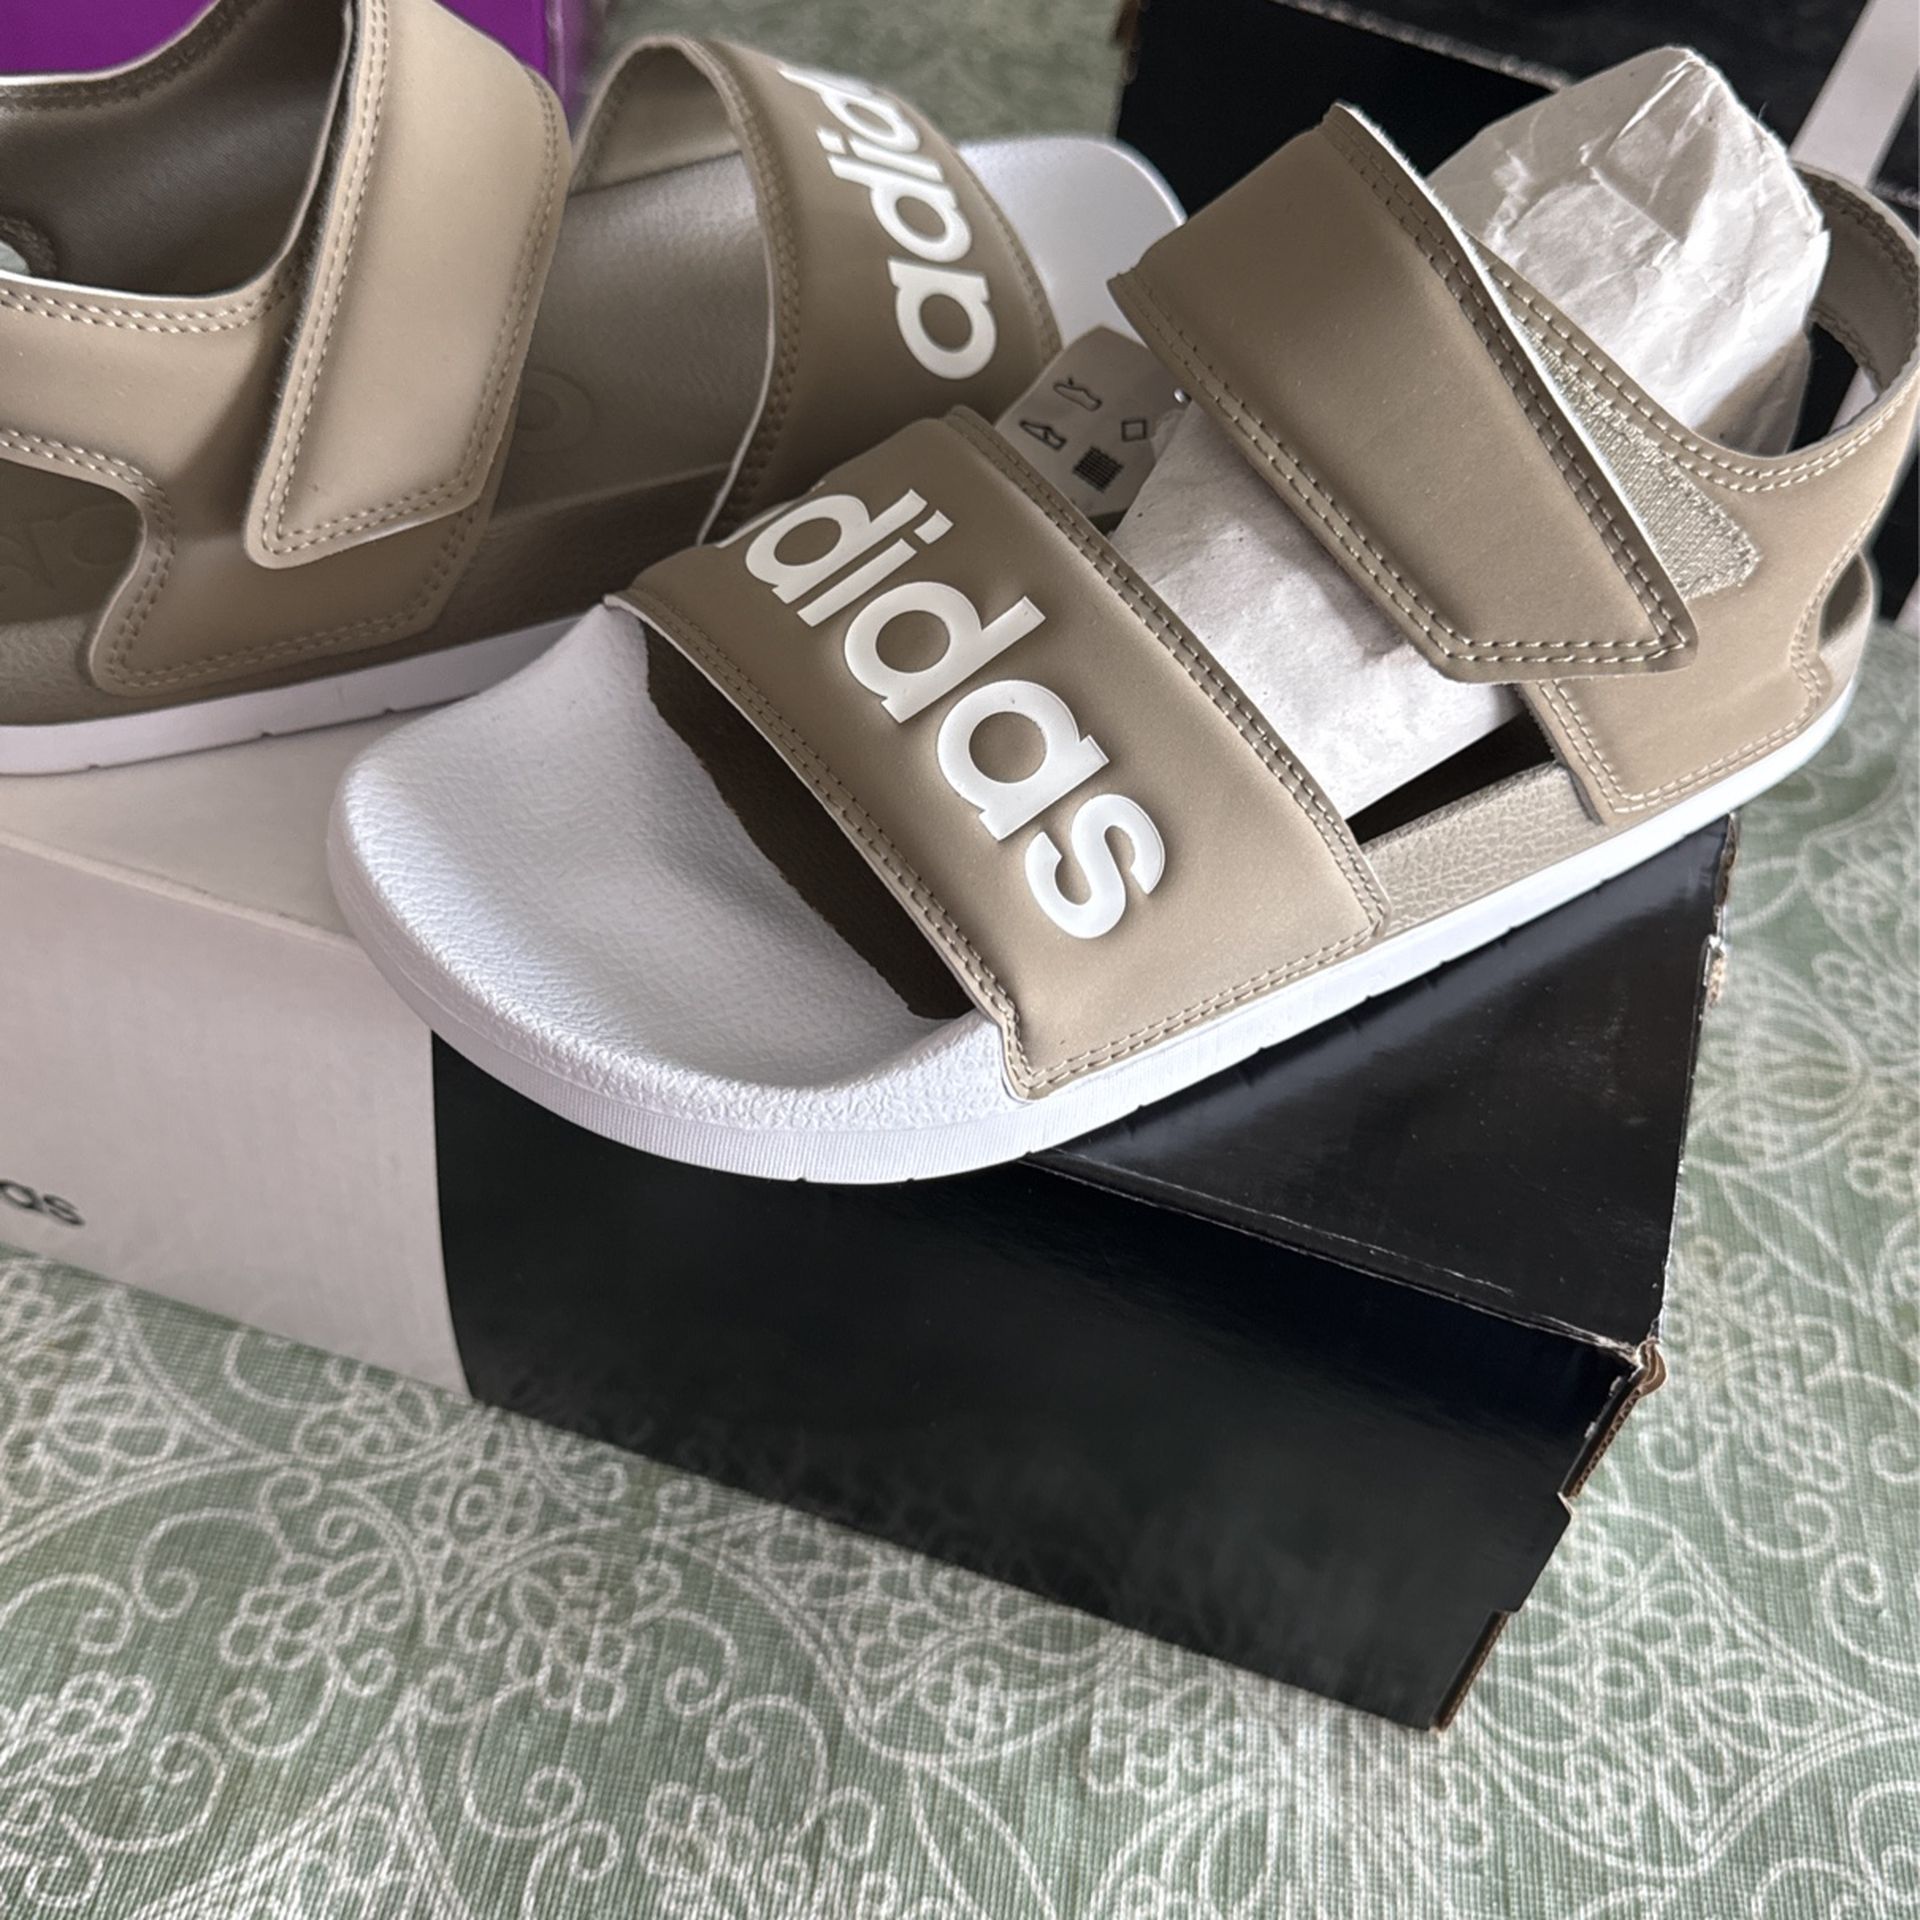 Brand New Adidas Sandals Size 8 For Women 